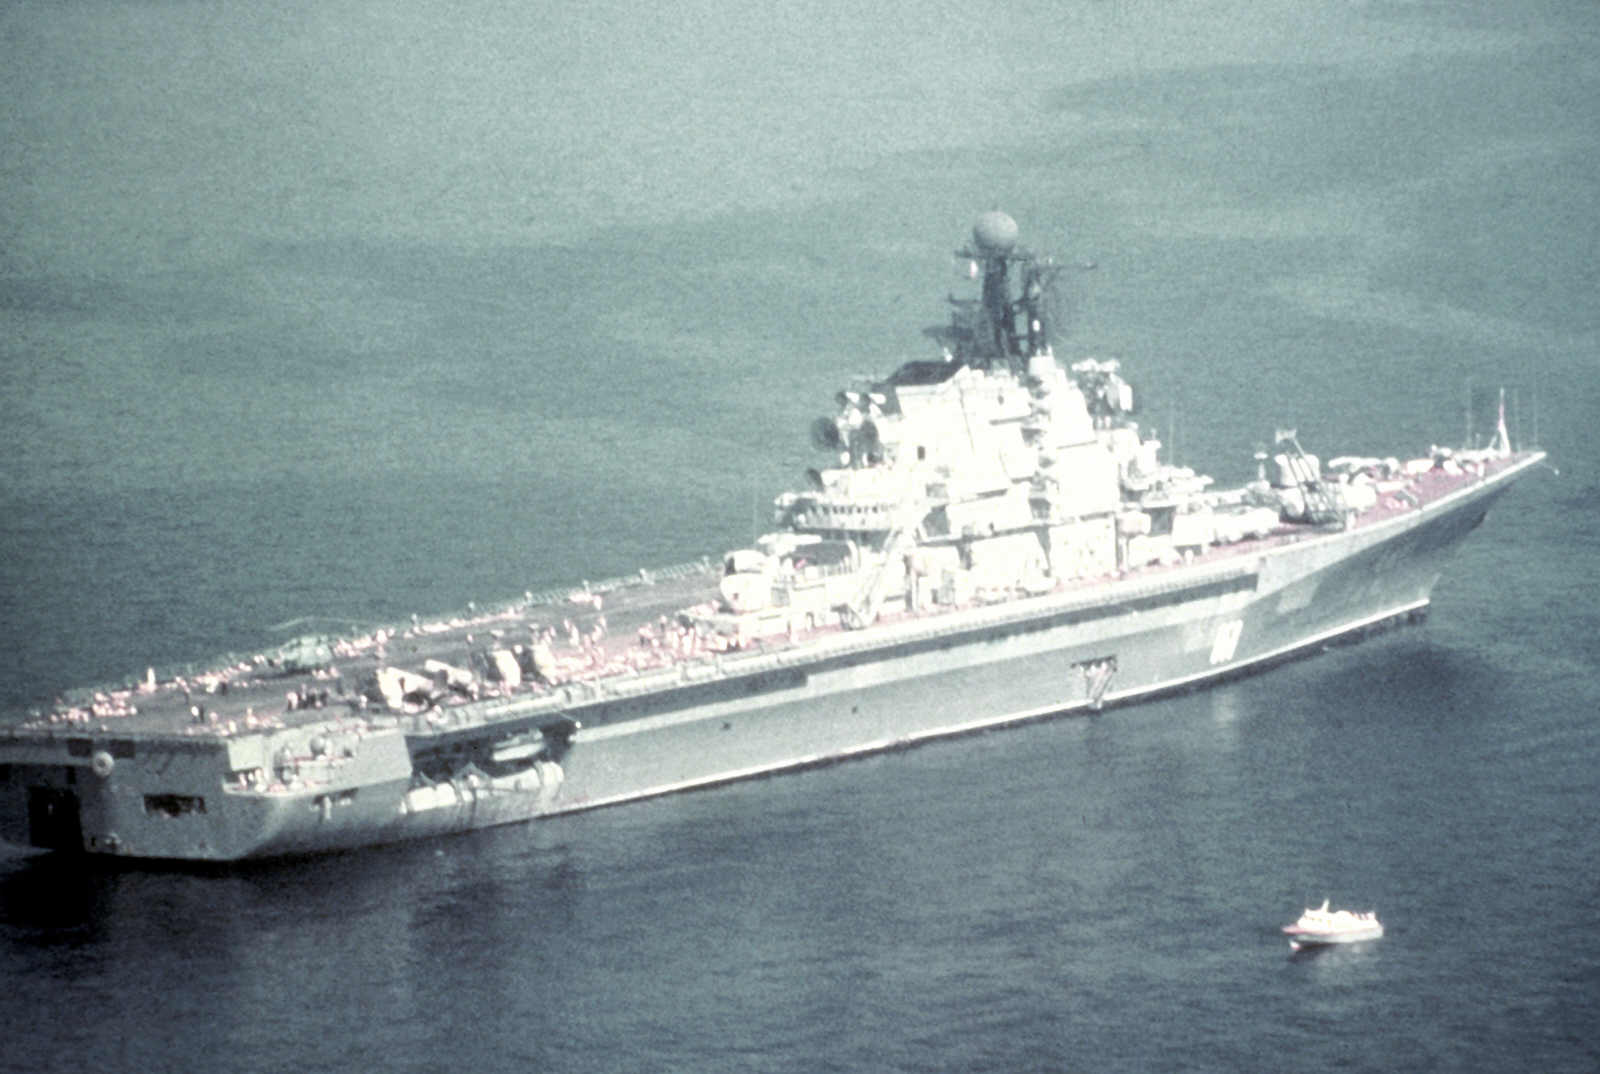 %20820501-A%20port%20quarter%20view%20of%20the%20Soviet%20guided%20missile%20VSTOL%20aircraft%20carrier%20KIEV%20.jpg